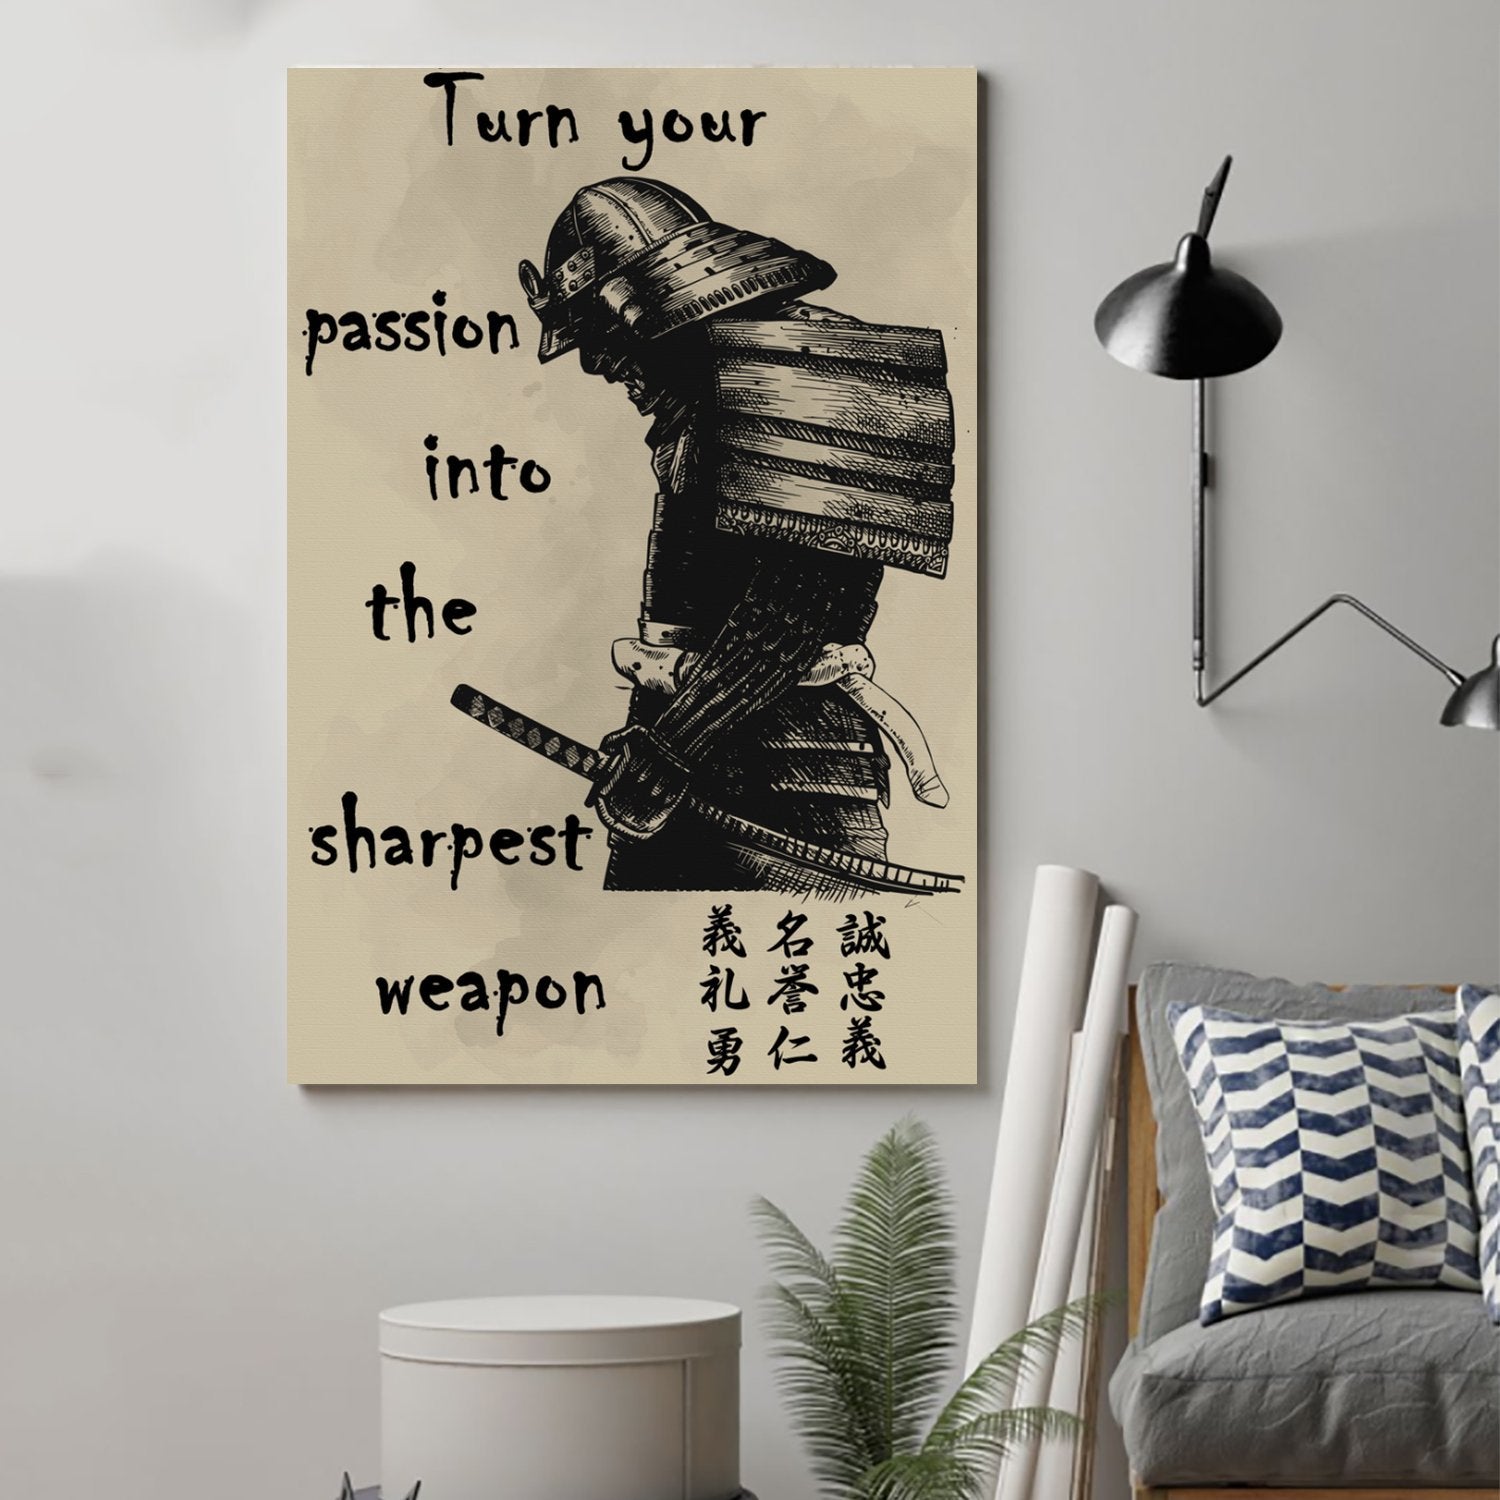 samurai Canvas and Poster ��� turn your passion into the sharpest weapon wall decor visual art - GIFTCUSTOM